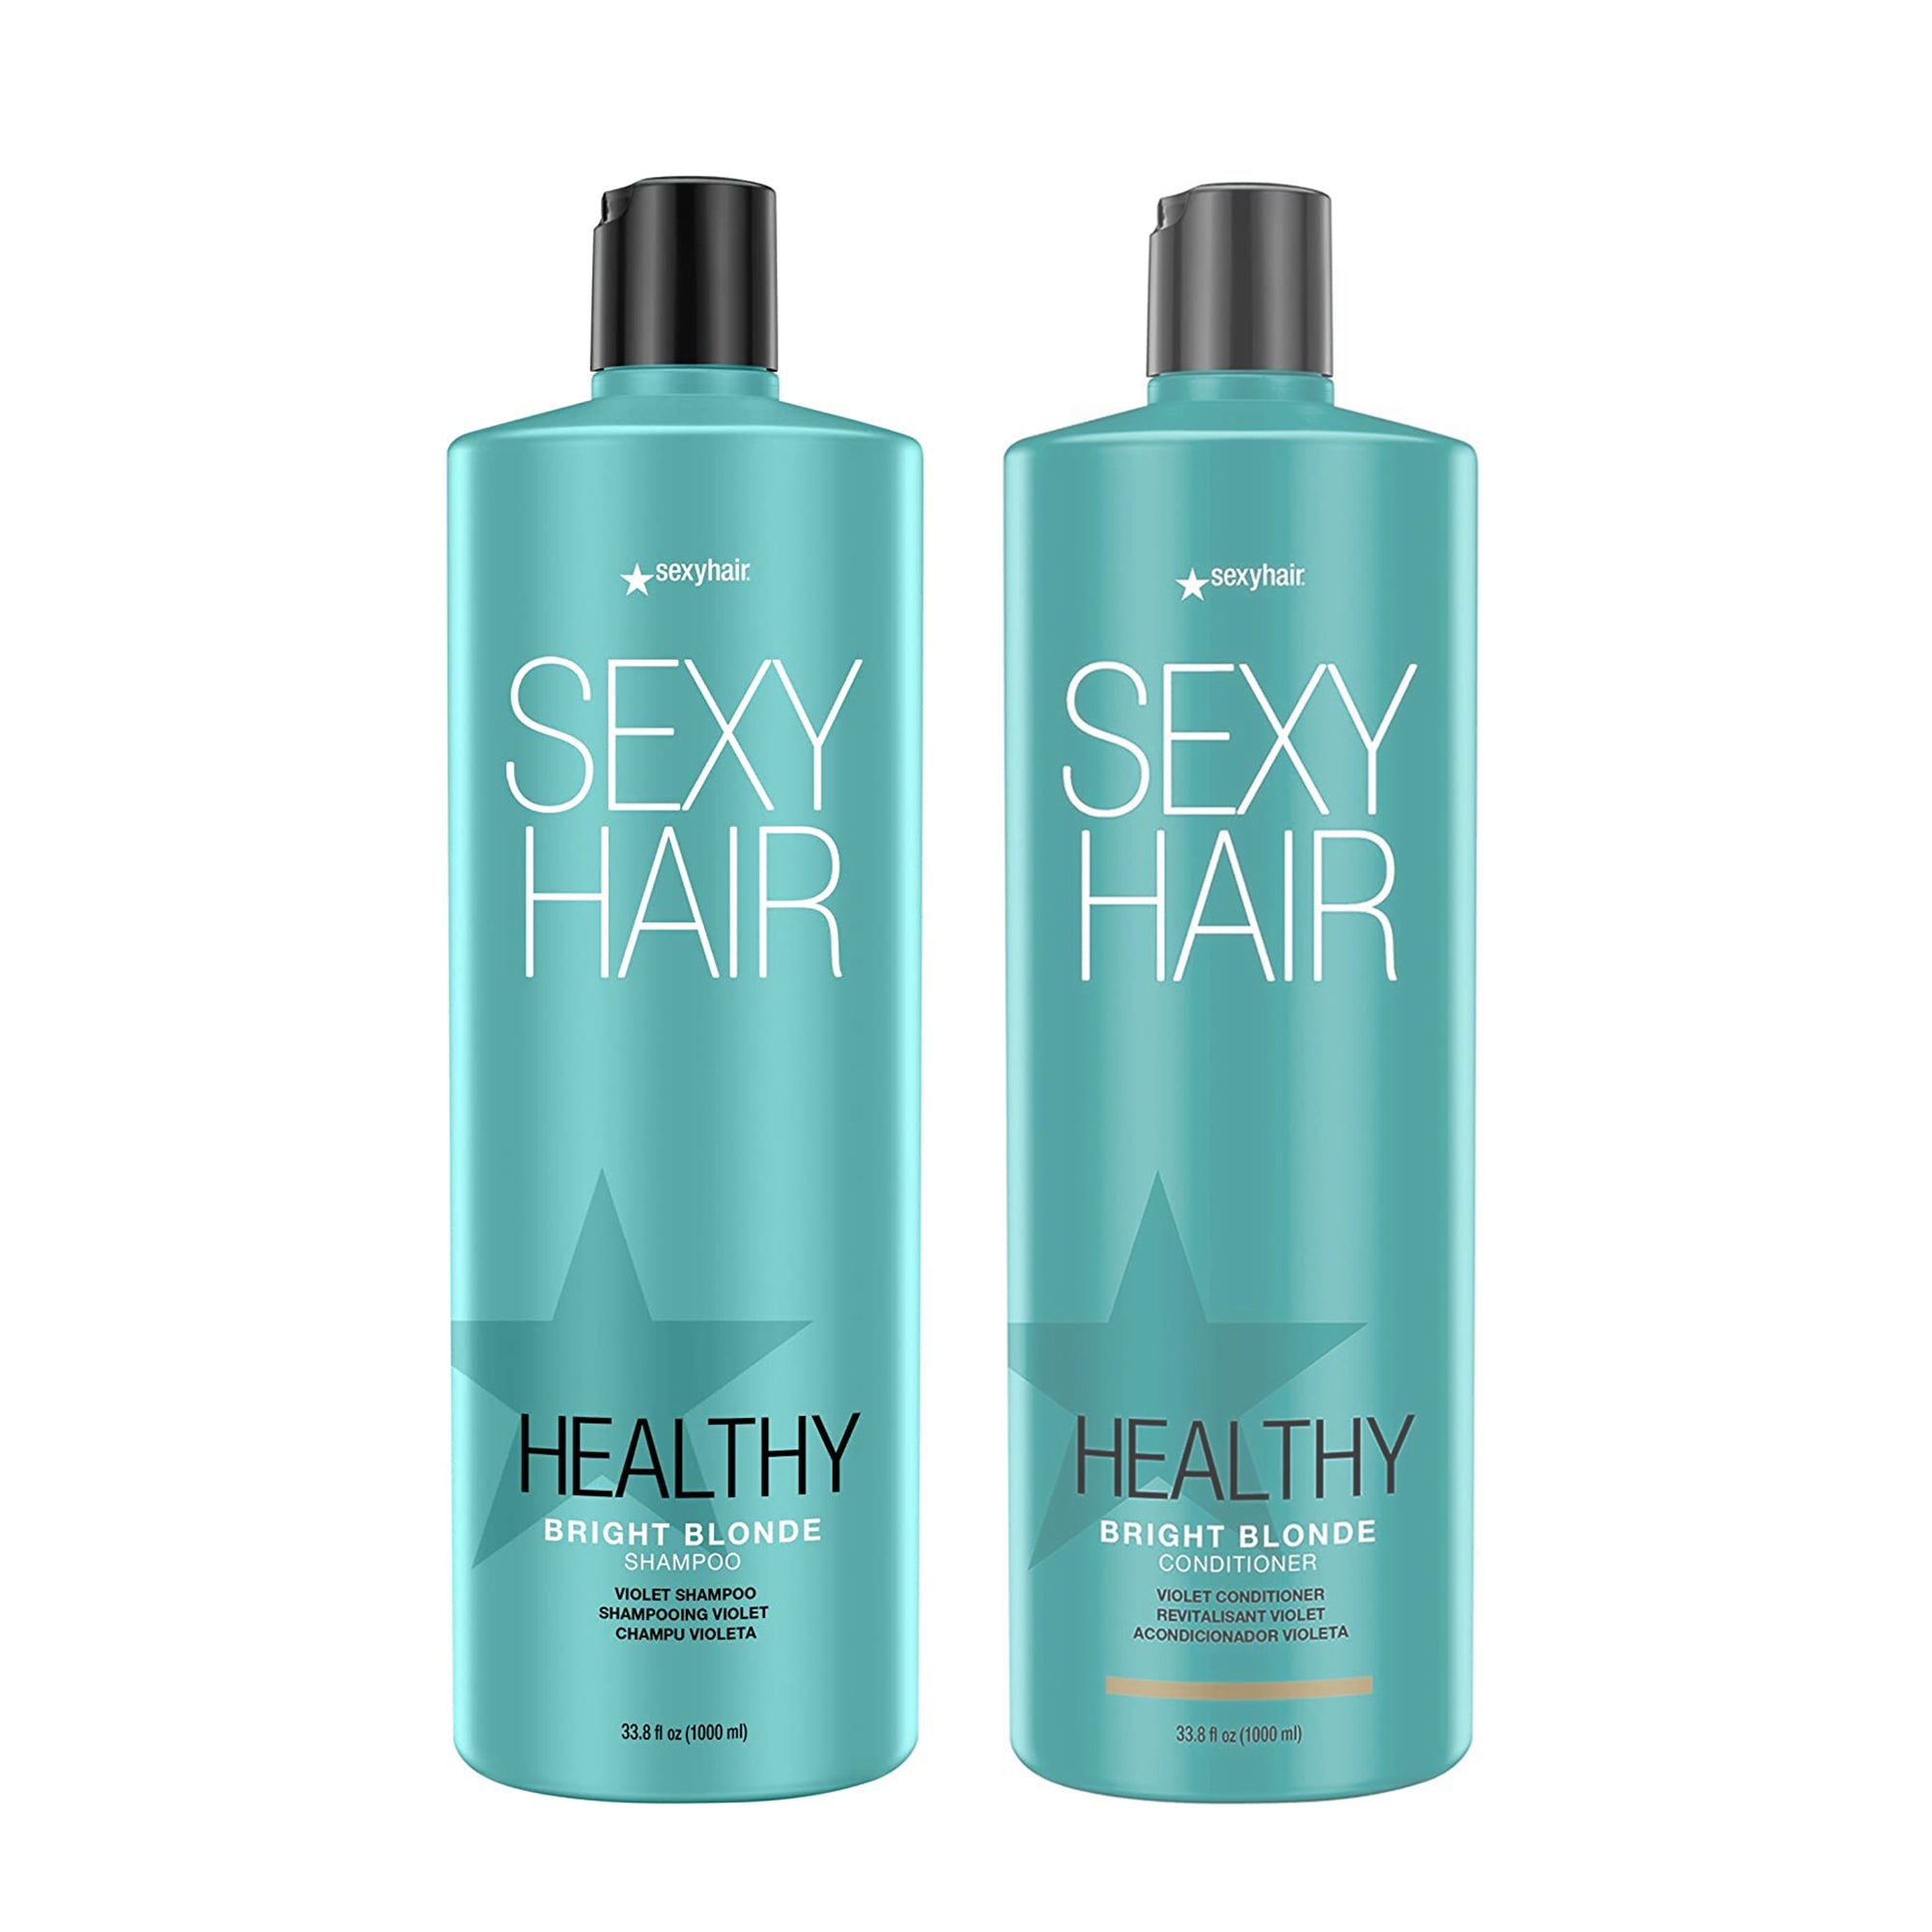 Sexy Hair Healthy SexyHair Bright Blonde Conditioner and Shampoo Duo ($86 Value) / 33.OZ